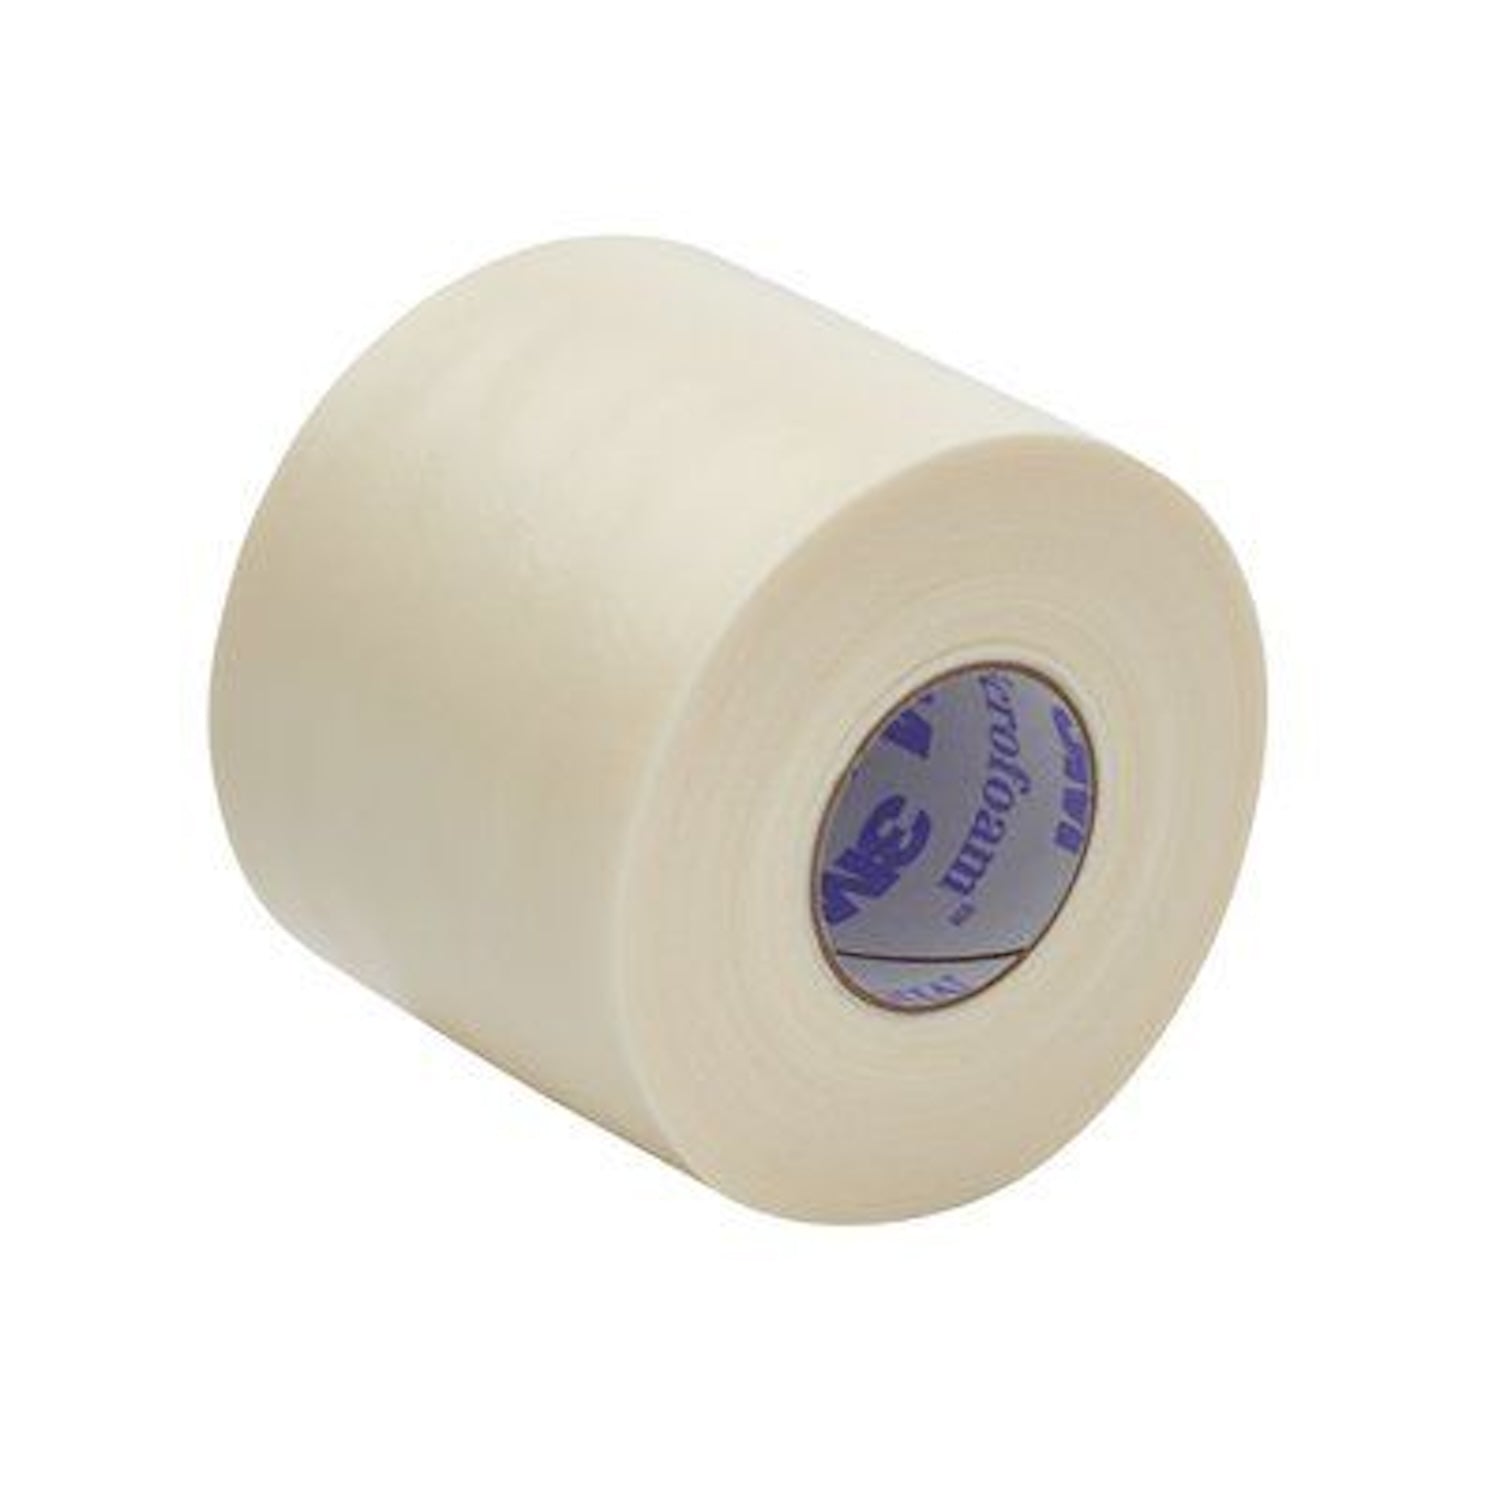 3M Microfoam Surgical Tape | 5cm x 5m | Pack of 6 | Short Expiry Date (1)